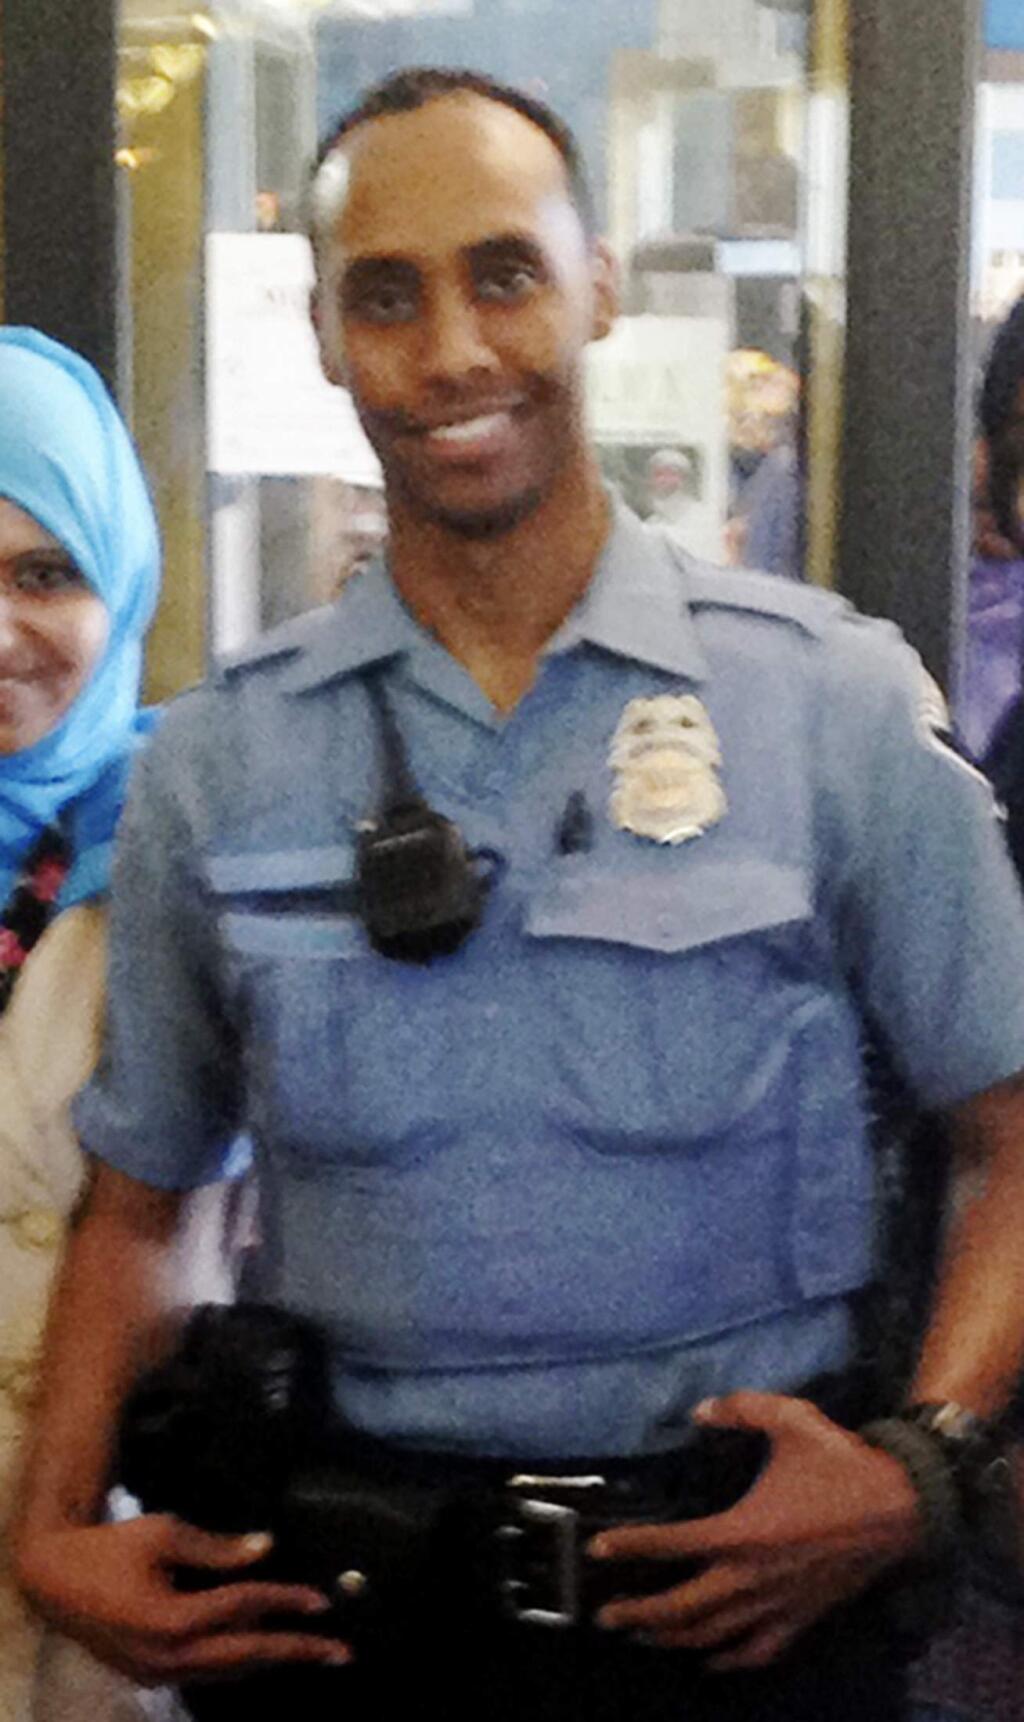 FILE - In this May 2016 file photo provided by the City of Minneapolis, police Officer Mohamed Noor poses for a photo at a community event welcoming him to the Minneapolis police force. Noor, a Minneapolis police officer who shot and killed an Australian woman in July 2017, turned himself in Tuesday, March 20, 2018, after a warrant was issued for his arrest, but the nature of the charges against him were not immediately known. (City of Minneapolis via AP, File)